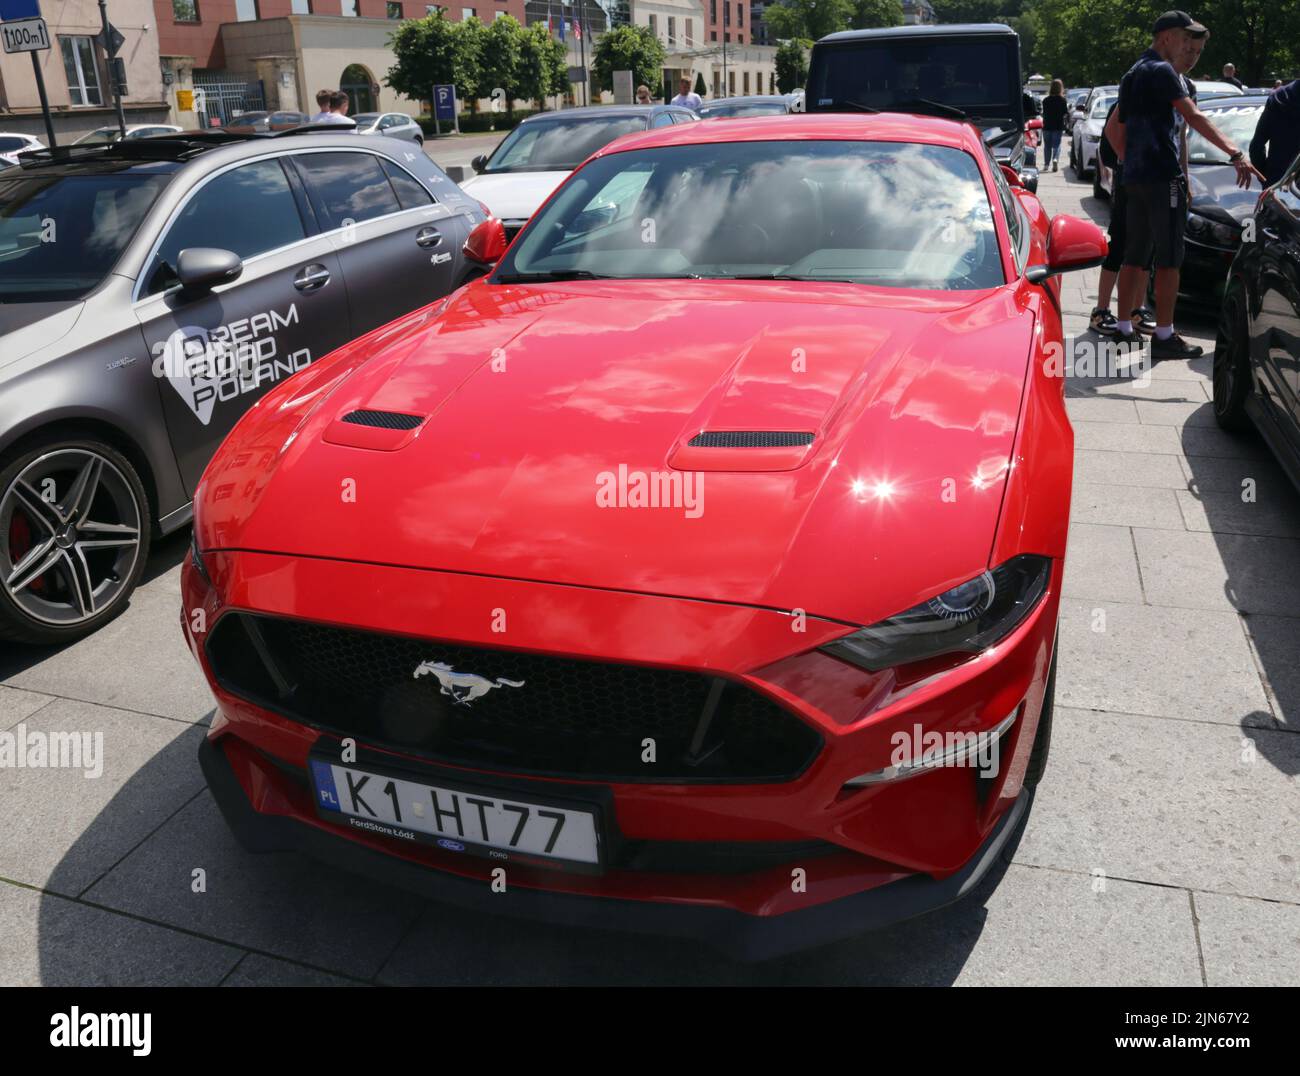 Cracow. Krakow. Poland. Red Ford Mustang, famous American sports car. Stock Photo